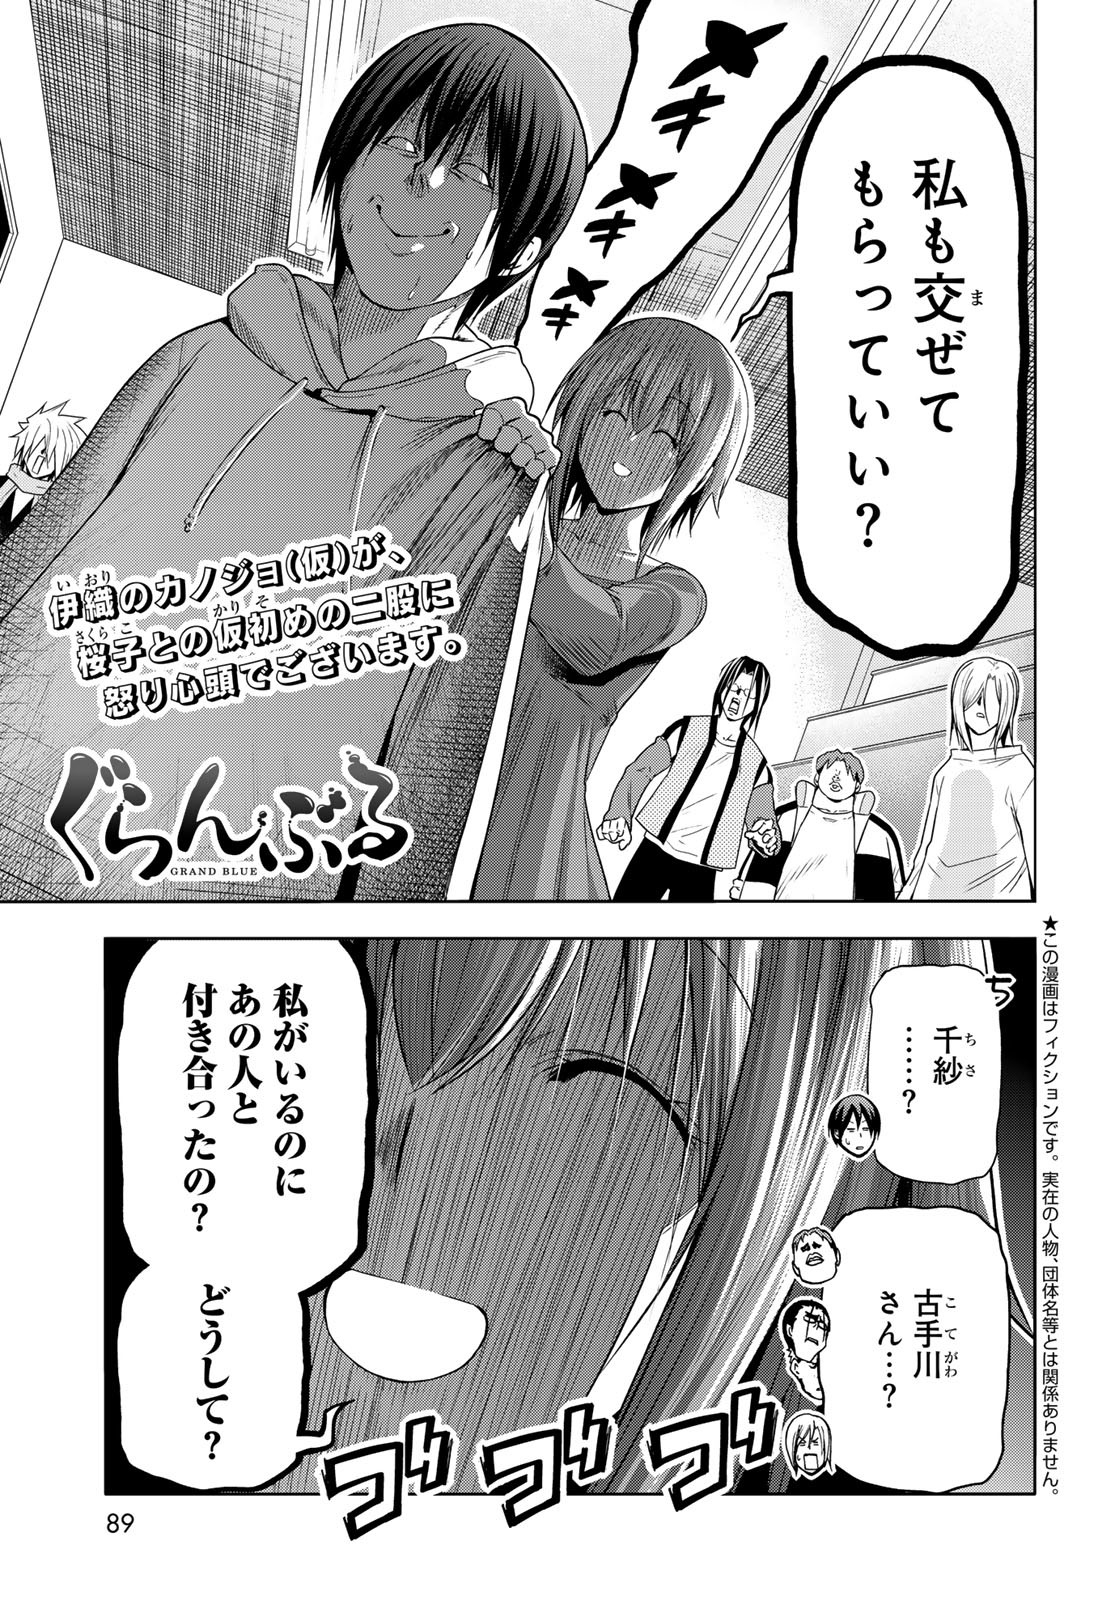 Grand Blue - ぐらんぶる - Chapter 90 - Page 1